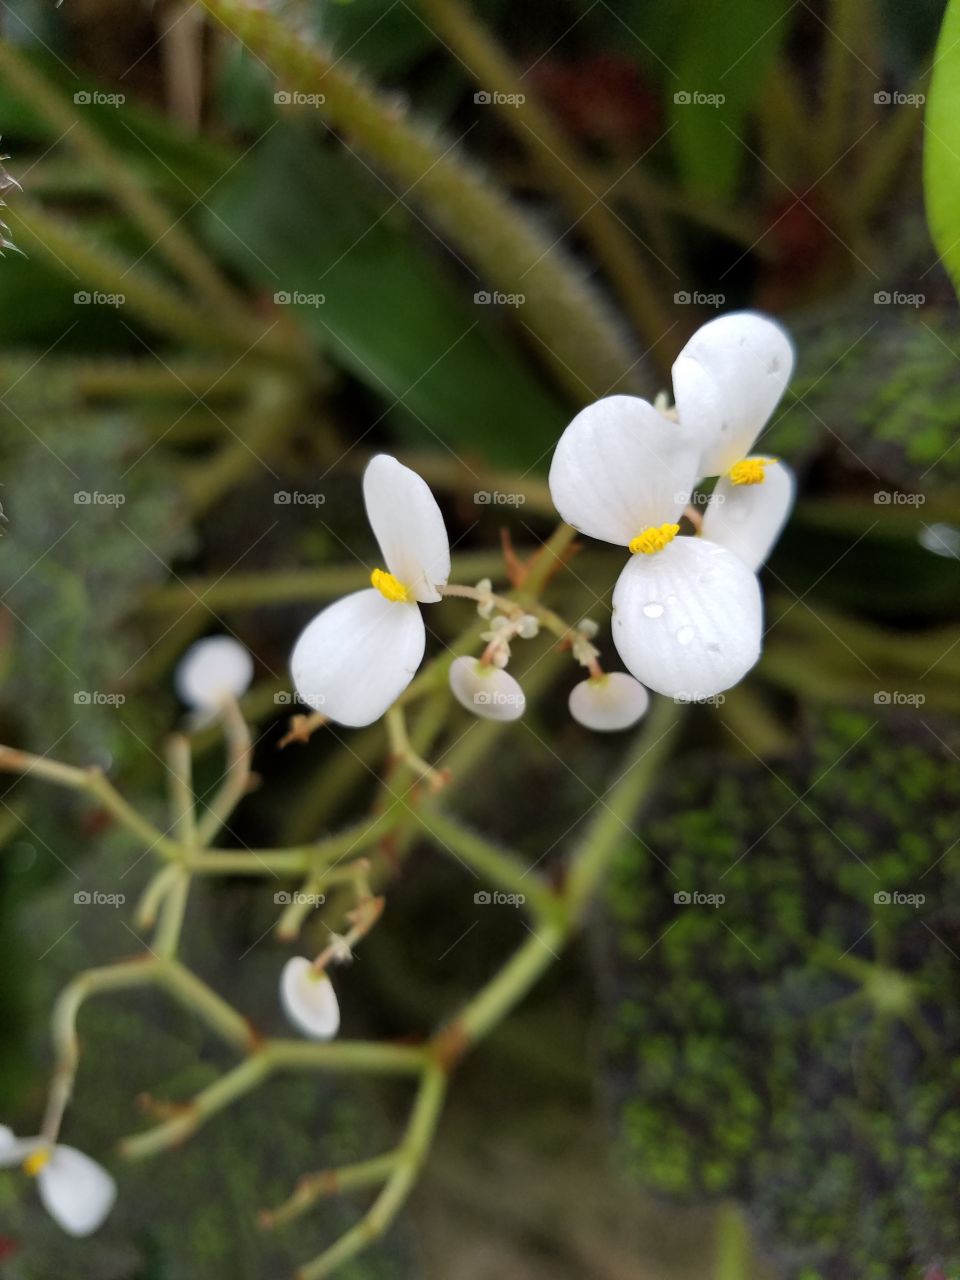 Small white flowers